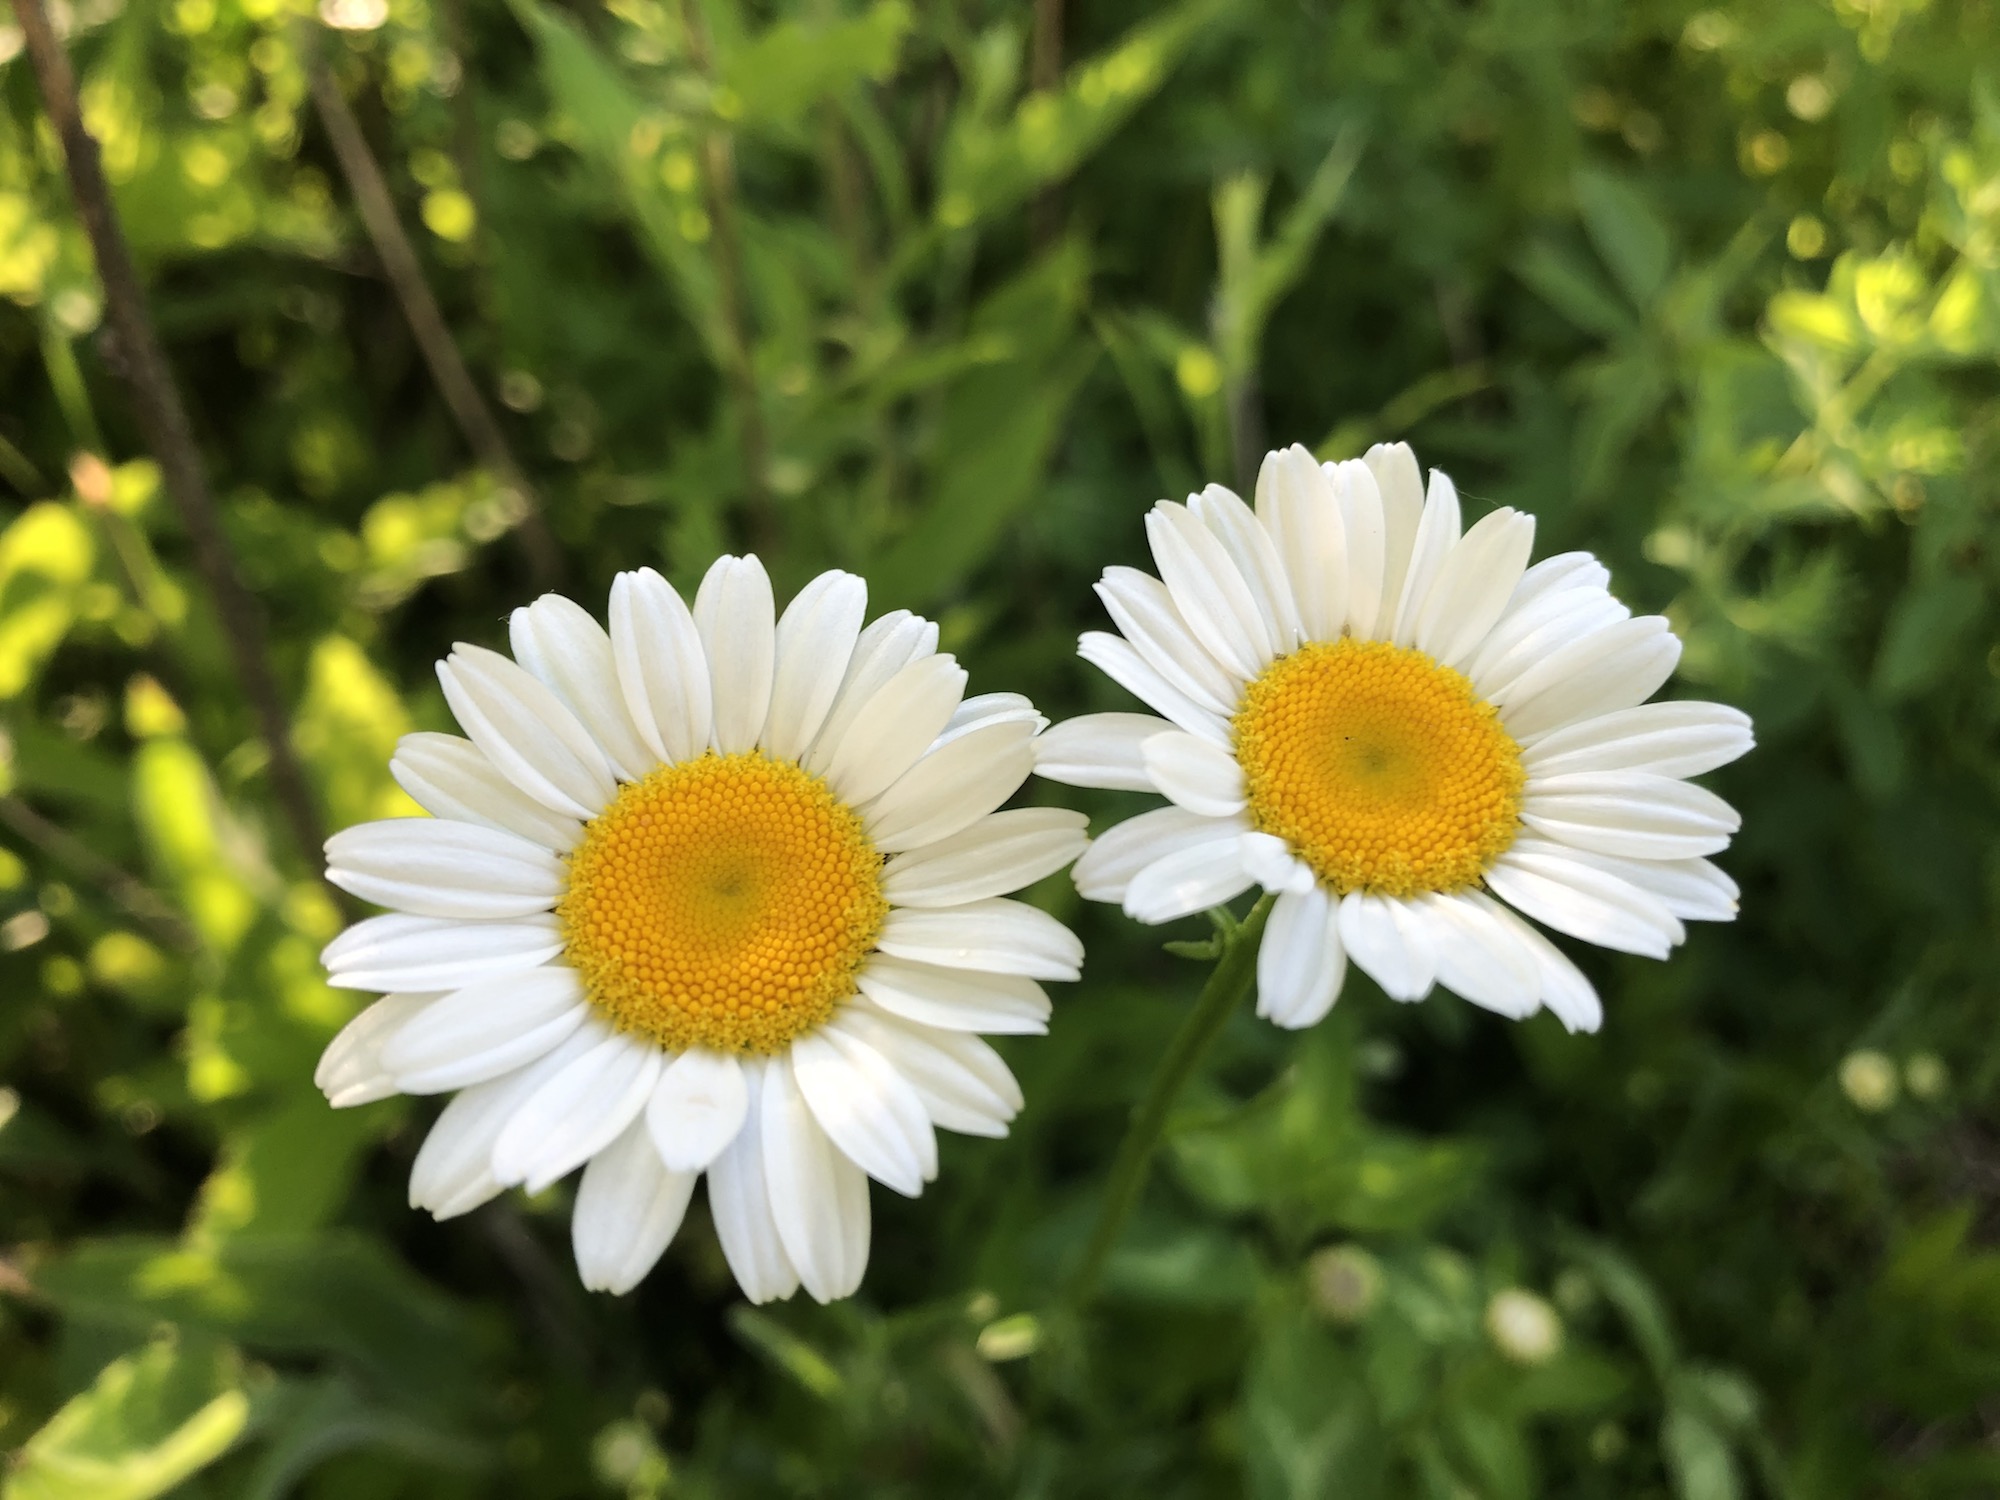 Ox-eye Daisy on bank of retaining pond in Madison, Wisconsin on June 8, 2020.